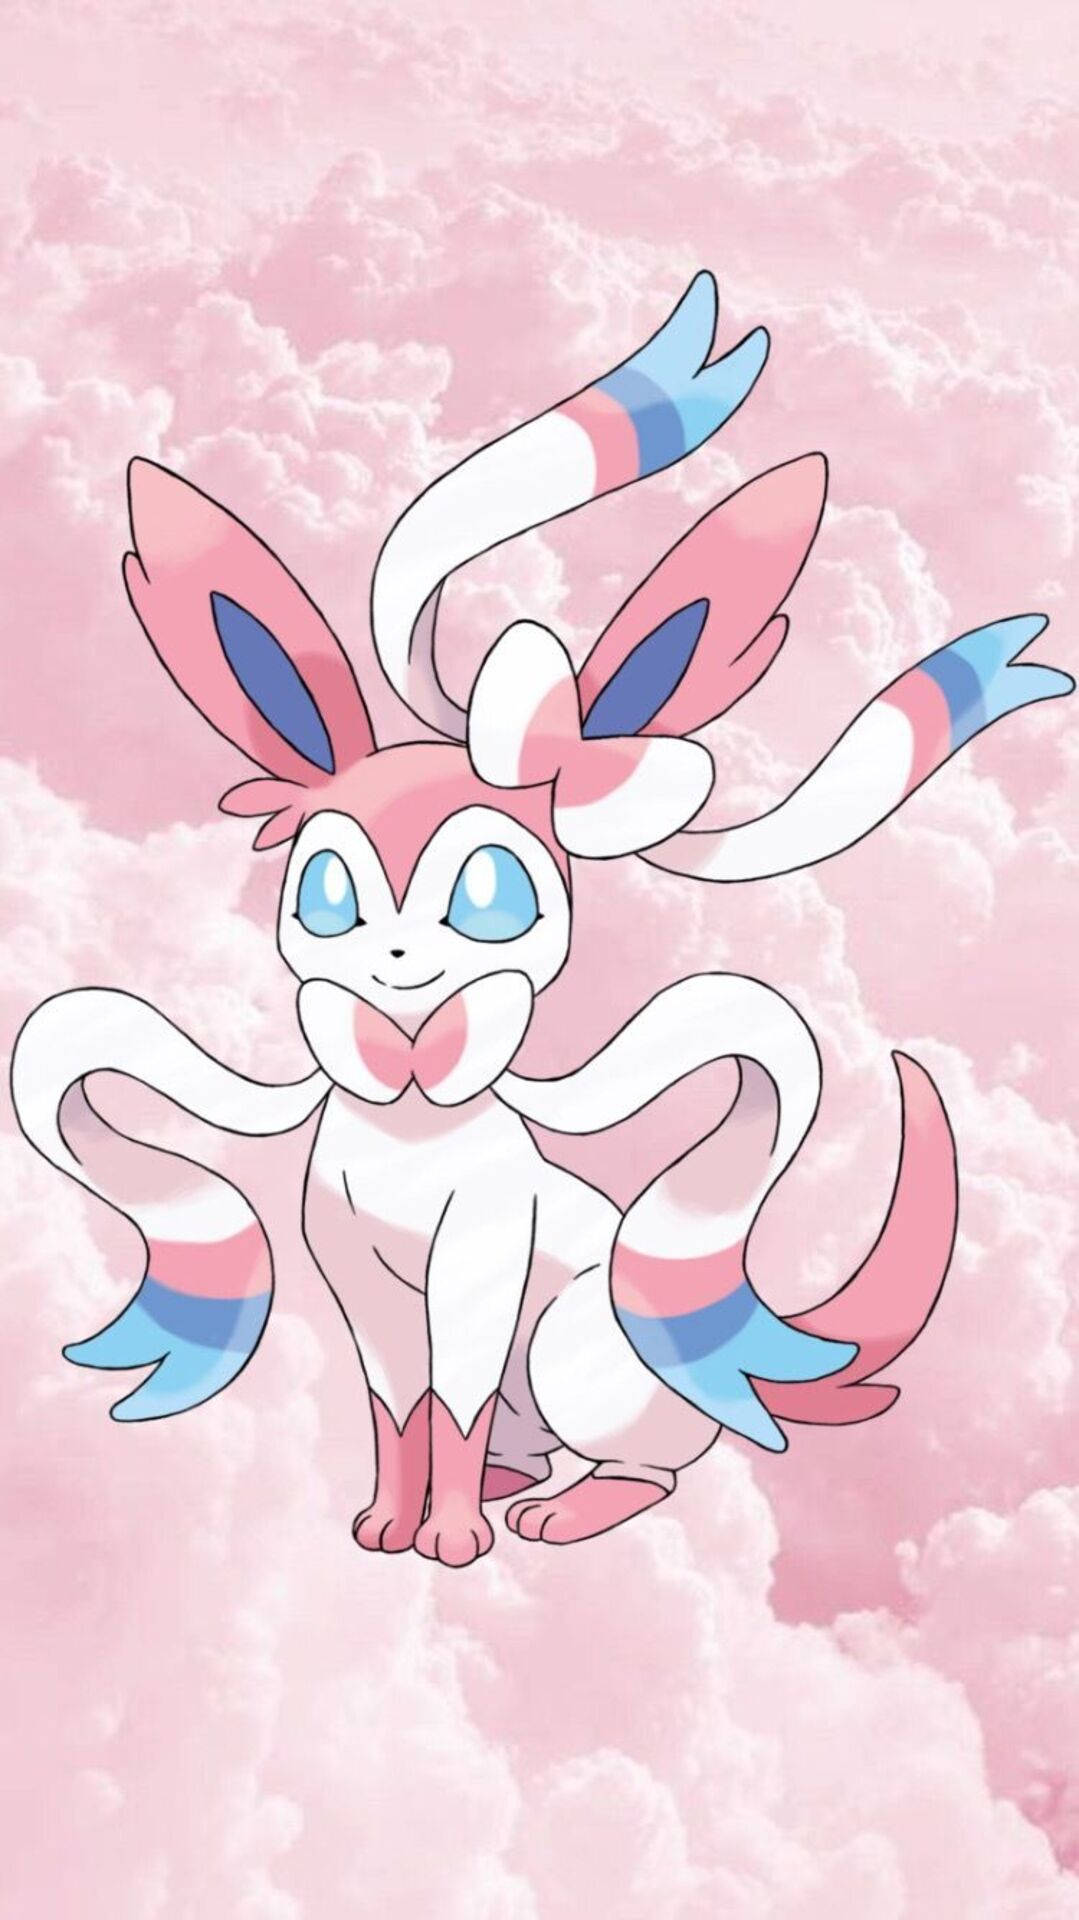 A Gentle Sylveon Enveloped In Beautiful Pink Clouds Background